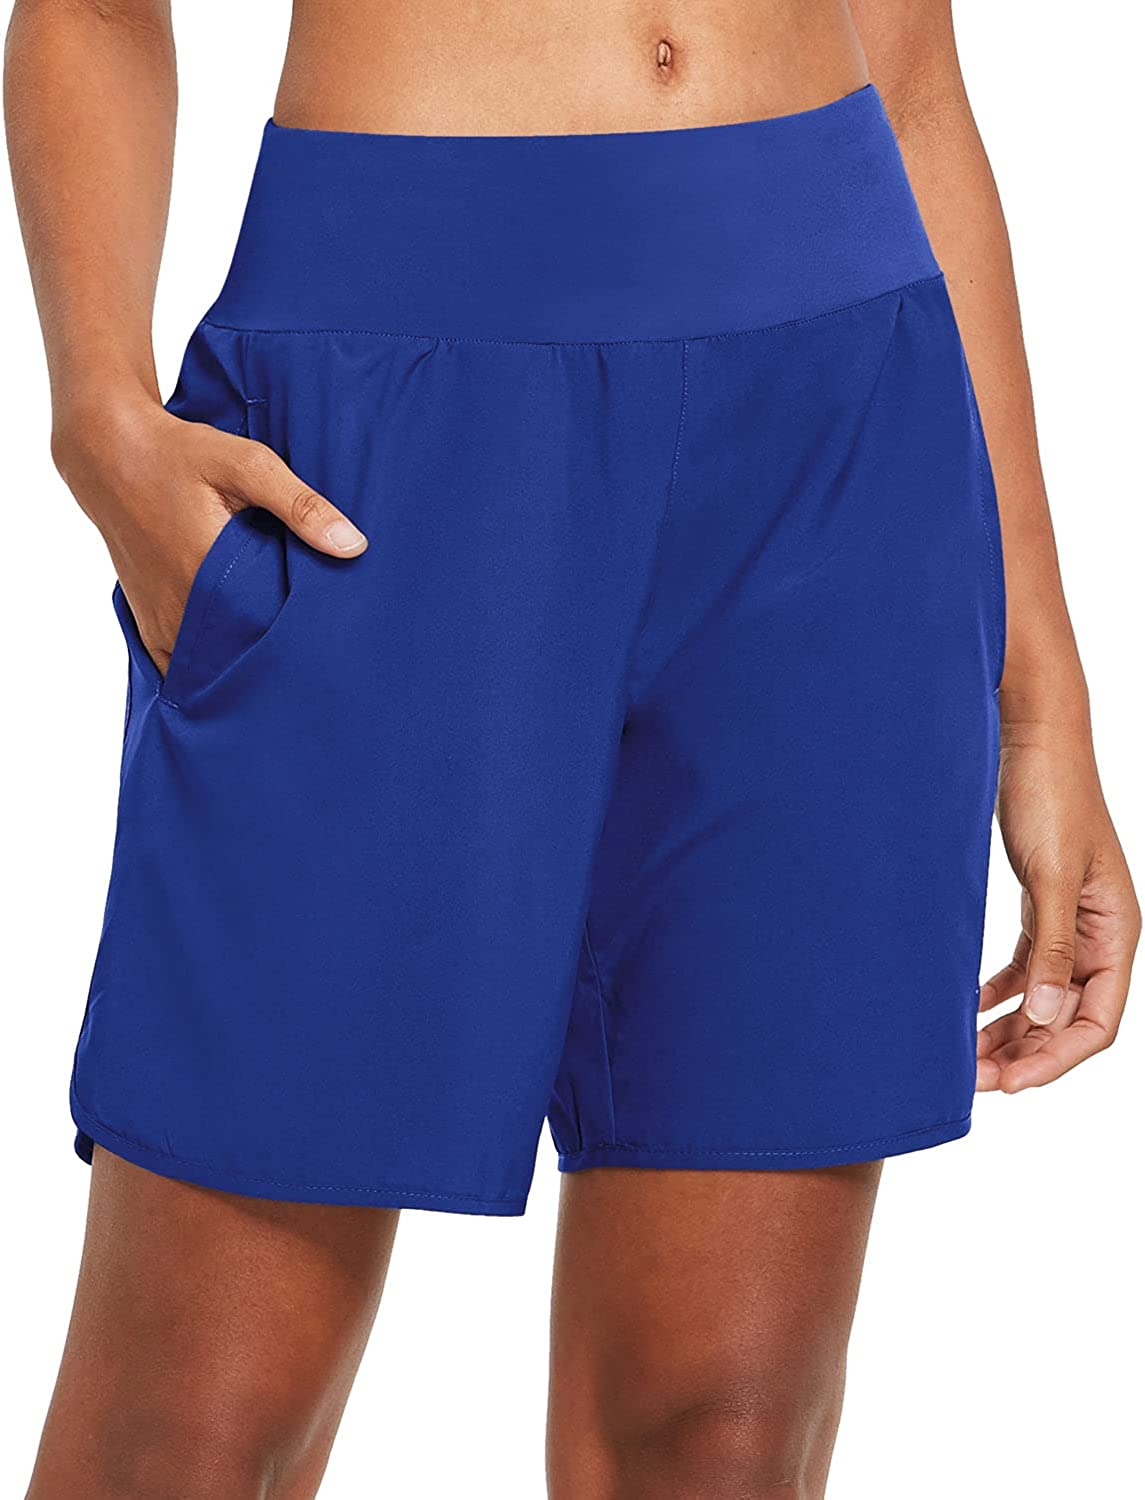 BALEAF Womens' 7 Long Running Athletic Shorts with Liner Workout